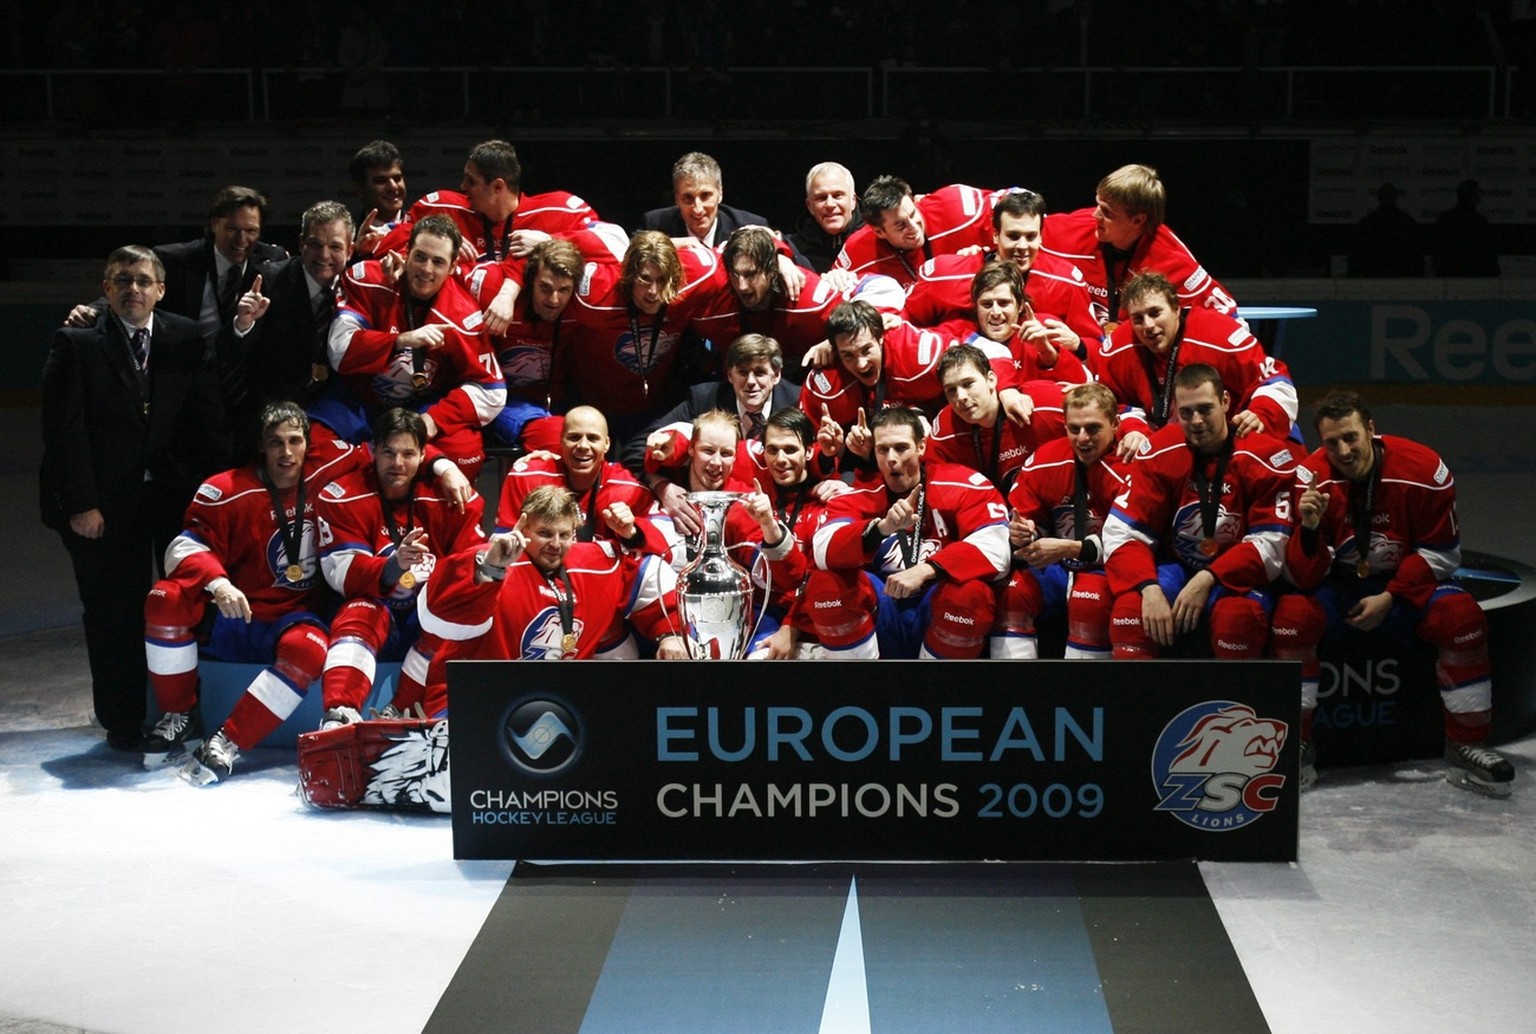 Players of Swiss team ZSC Lions celebrate after winning the ice hockey Champions League final match against Metallurg Magnitogorsk in Rapperswil, Switzerland, Wednesday, January 28, 2009. (KEYSTONE/St ...